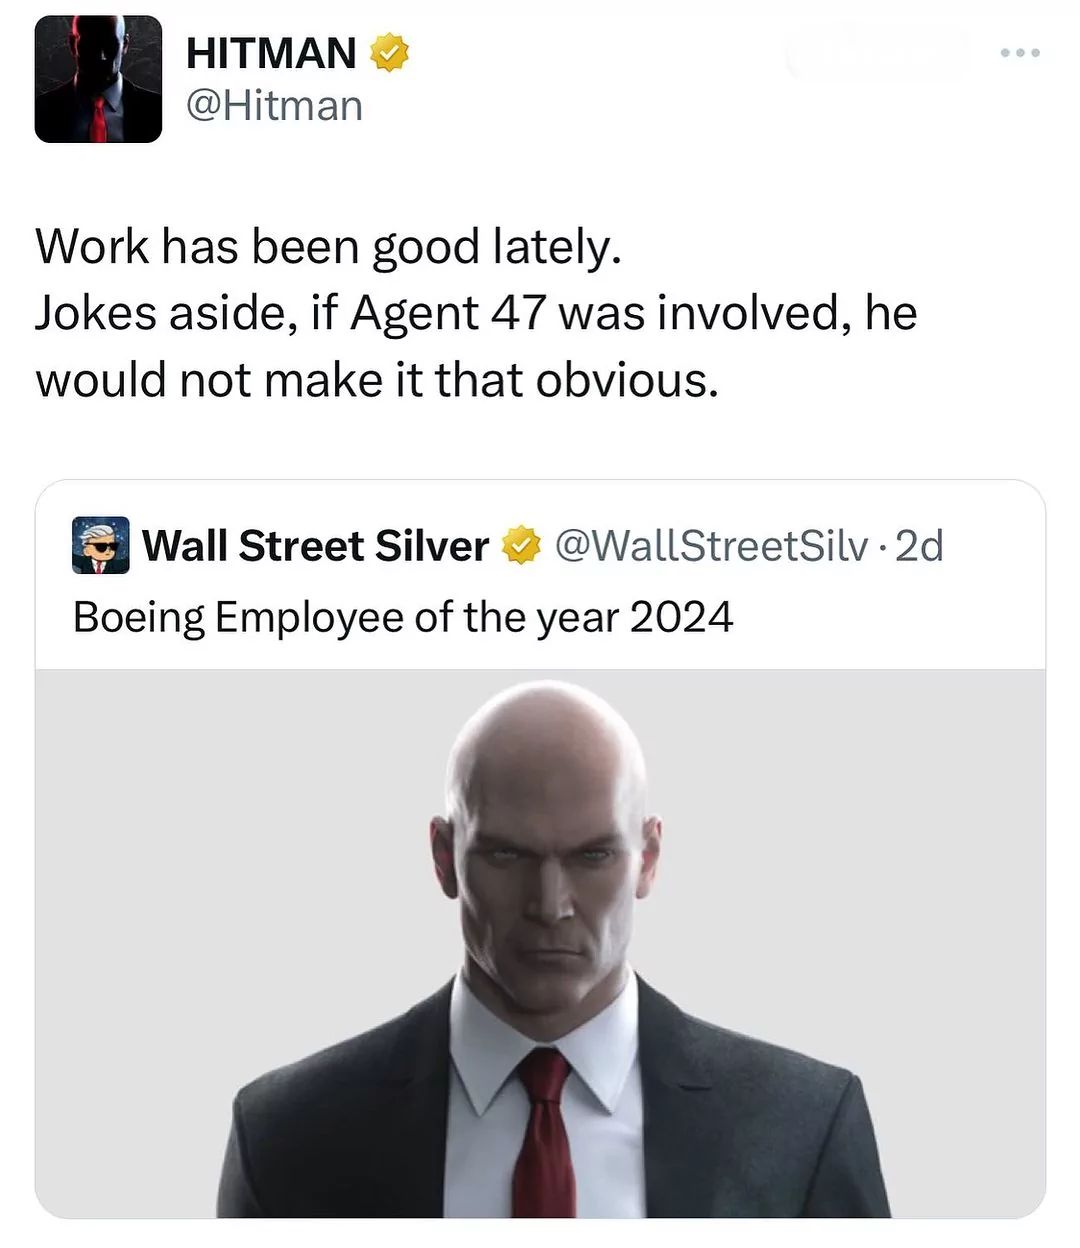 HITMAN ✓
@Hitman
Work has been good lately.
Jokes aside, if Agent 47 was involved, he
would not make it that obvious.
Wall Street Silver
@WallStreetSilv. 2d
Boeing Employee of the year 2024